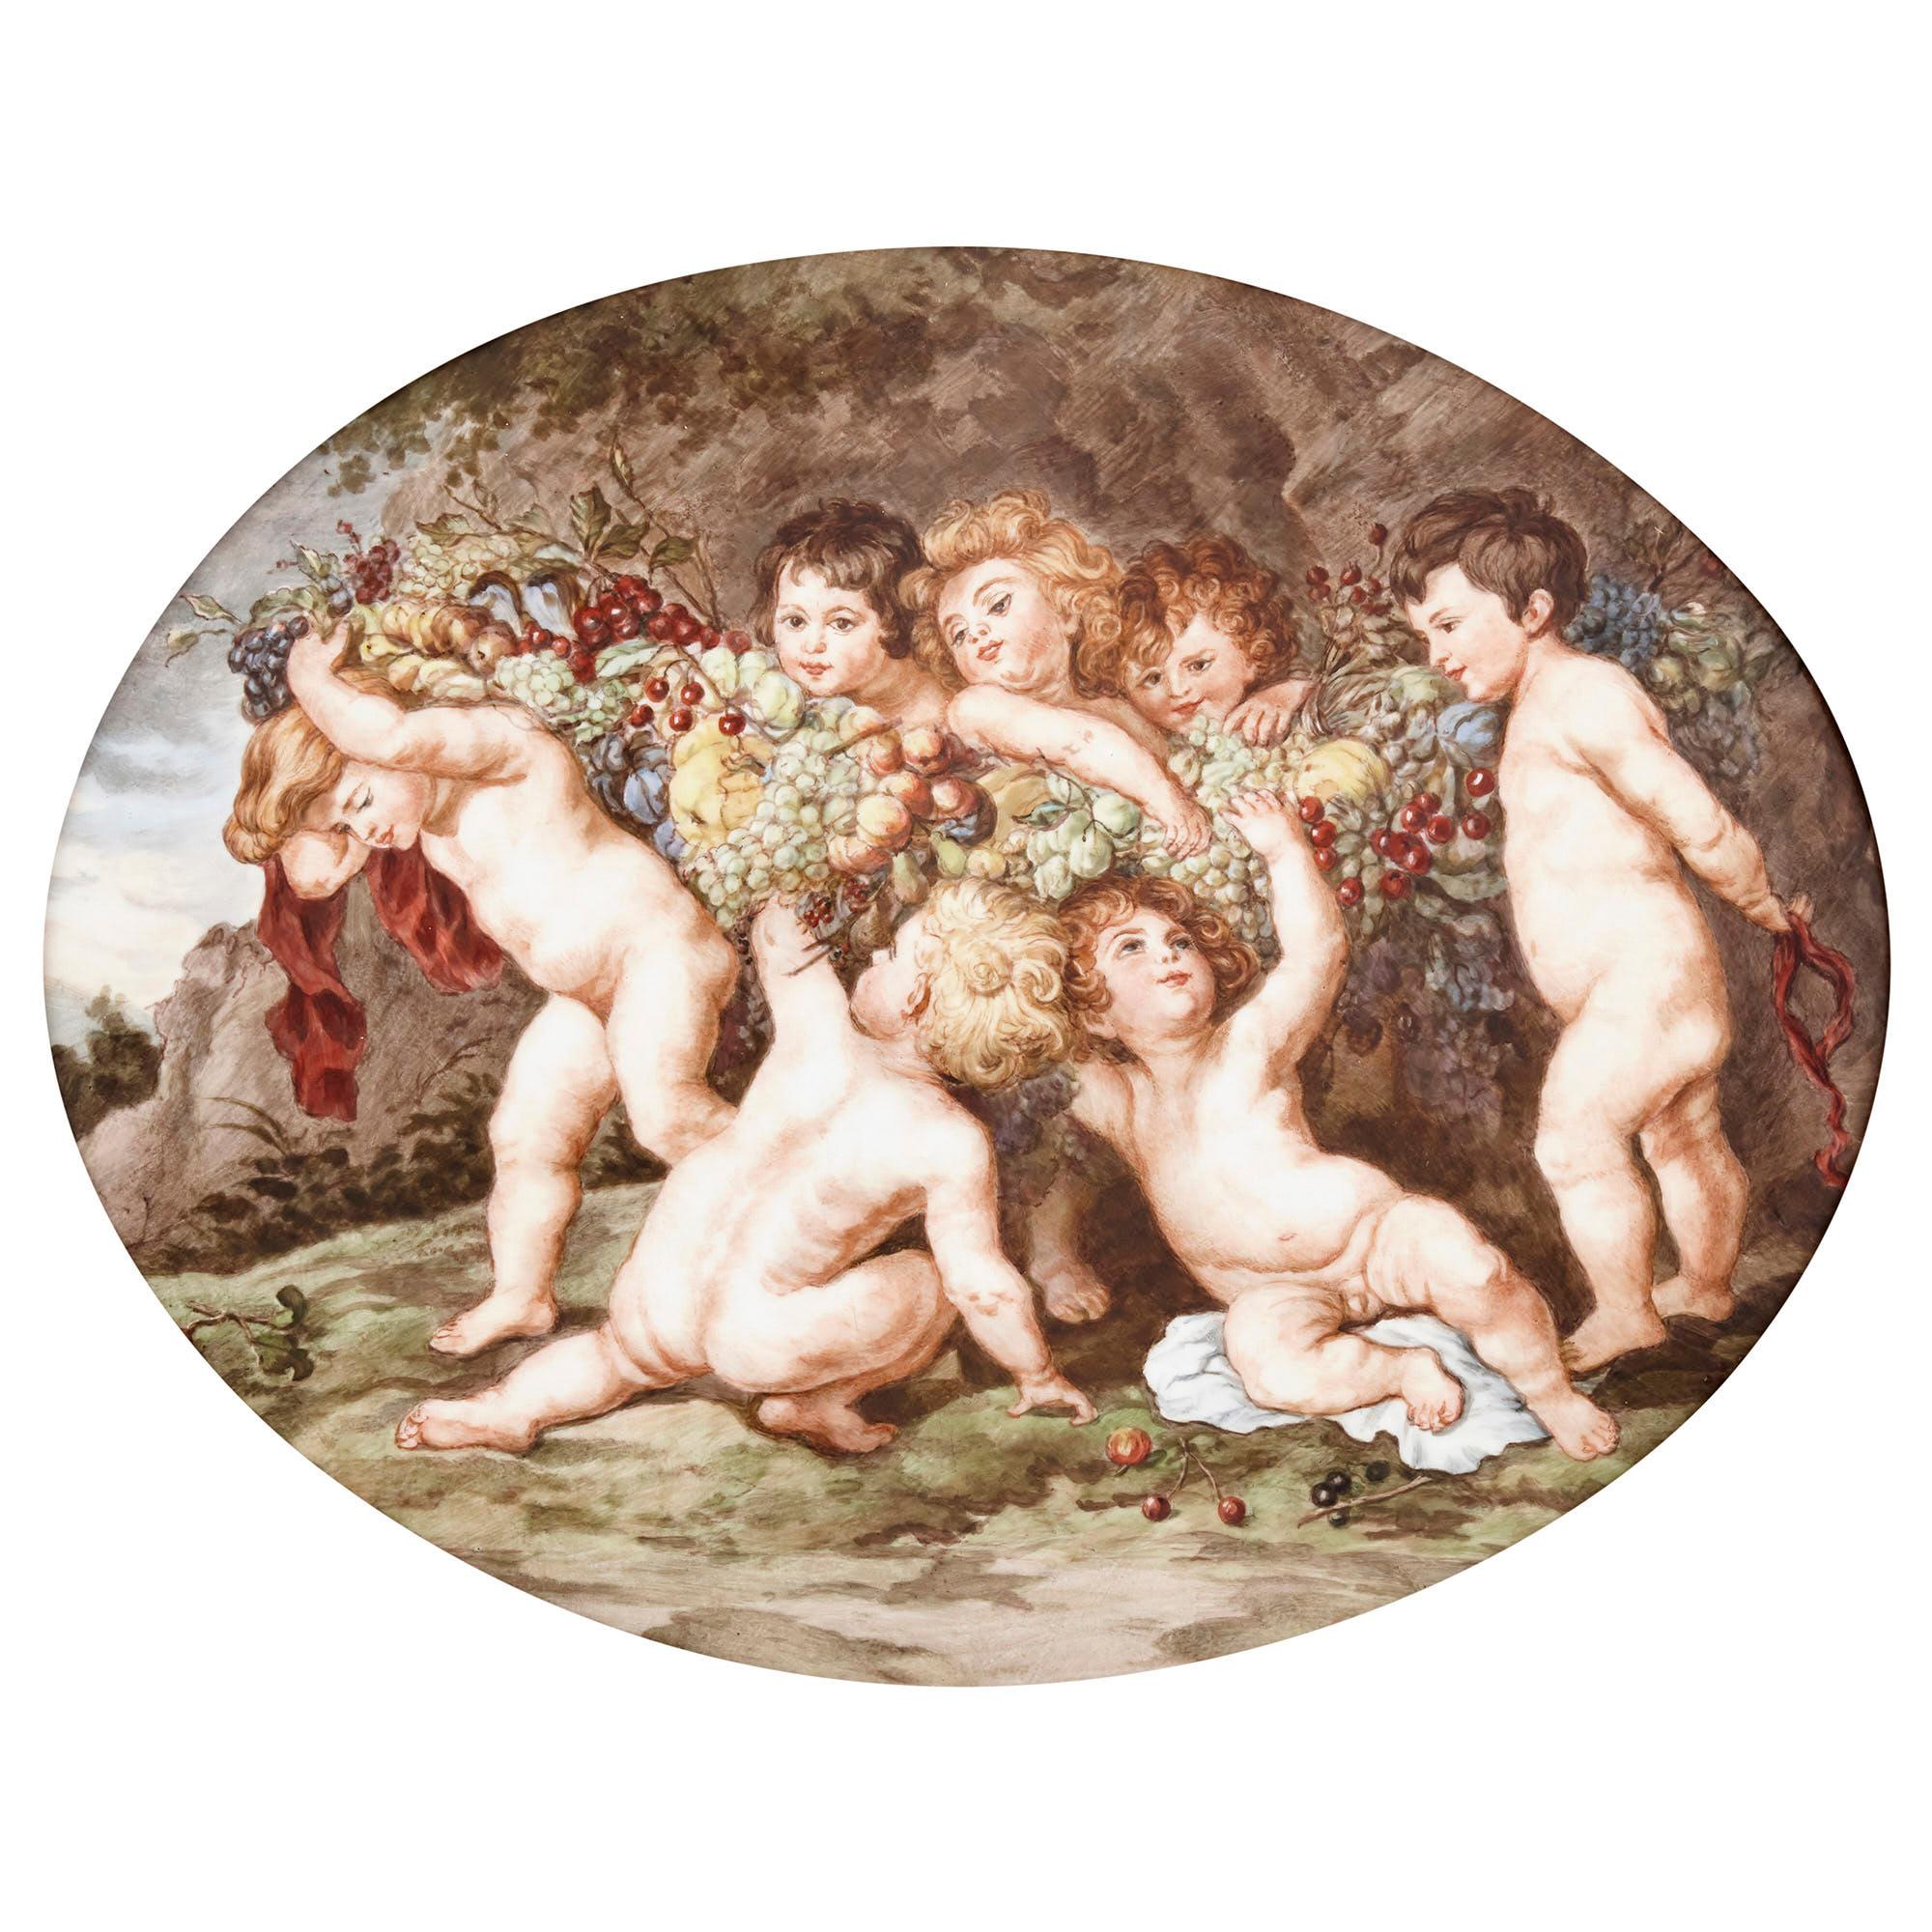 Oval porcelain plaque with a painted scene after Rubens
French, 19th century
Frame: Height 38cm, width 48cm, depth 3cm
Plaque: Height 34cm, width 44cm, depth 0.5cm

This beautiful antique French porcelain plaque, oval in form, features a